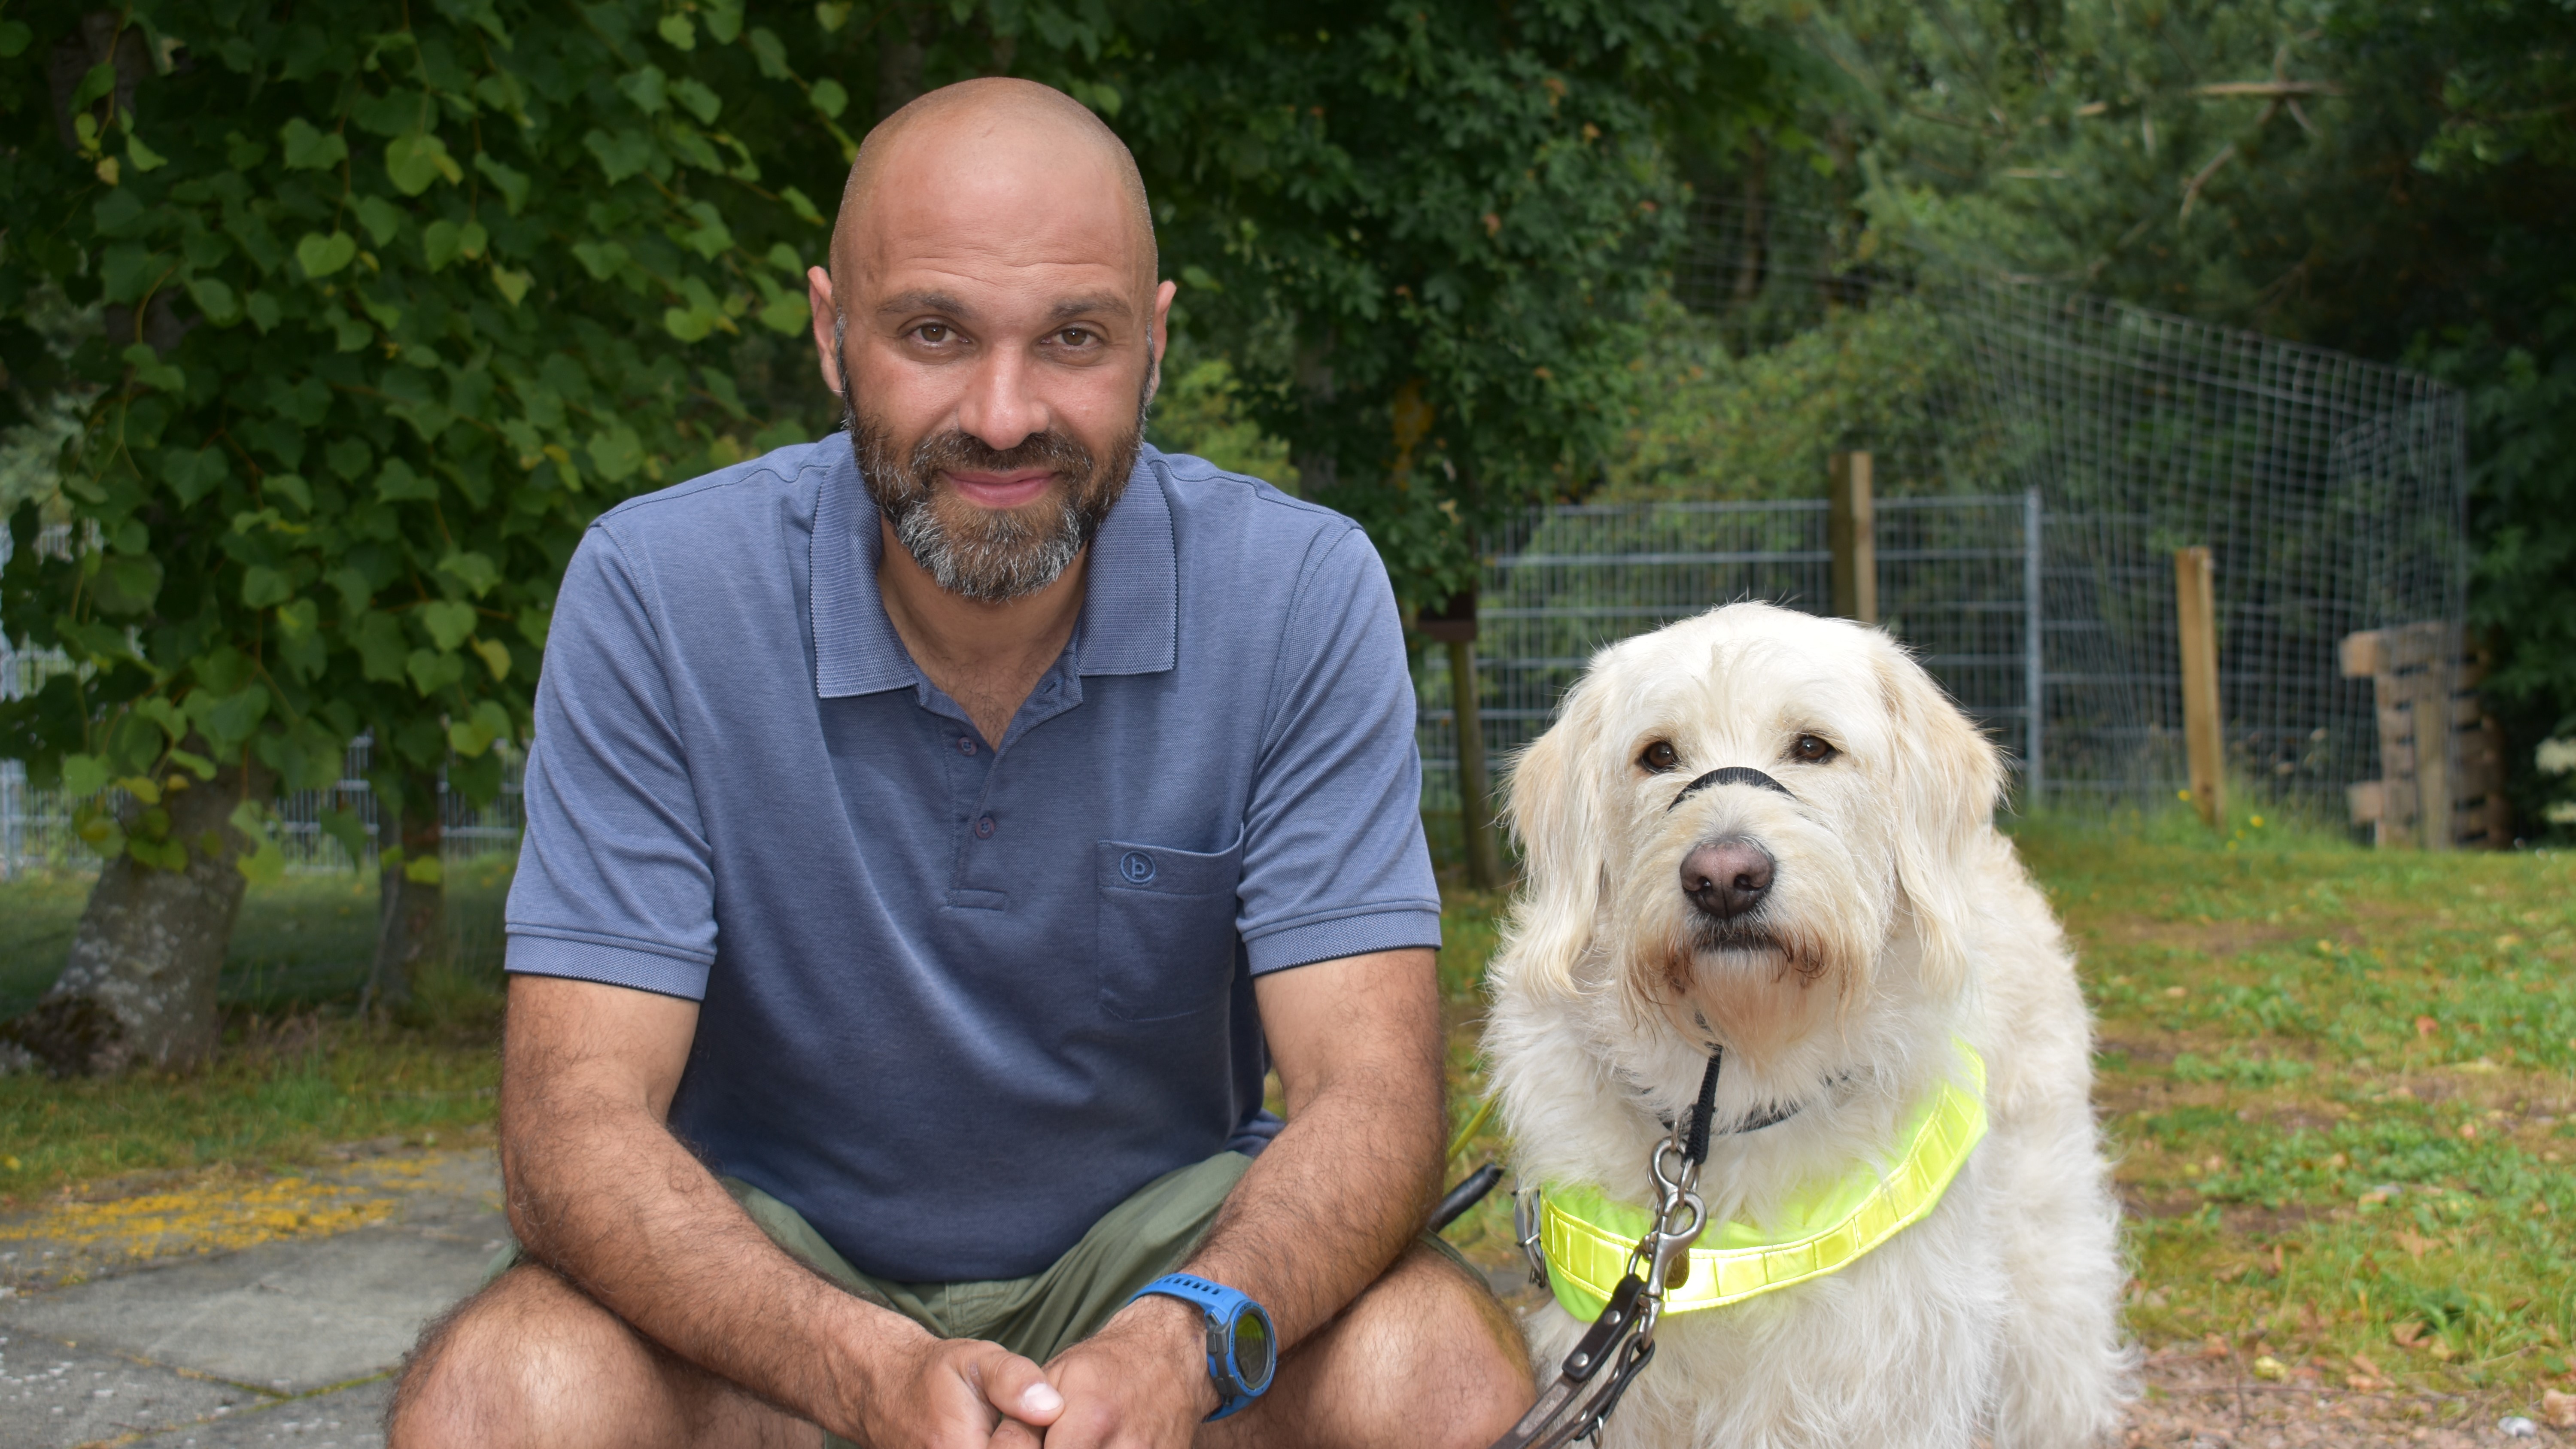 Guide Dog Mobility Specialist Paco sits next to cream Labradoodle Piran, who has a shaggy coat and wears a florescent guide dog harness